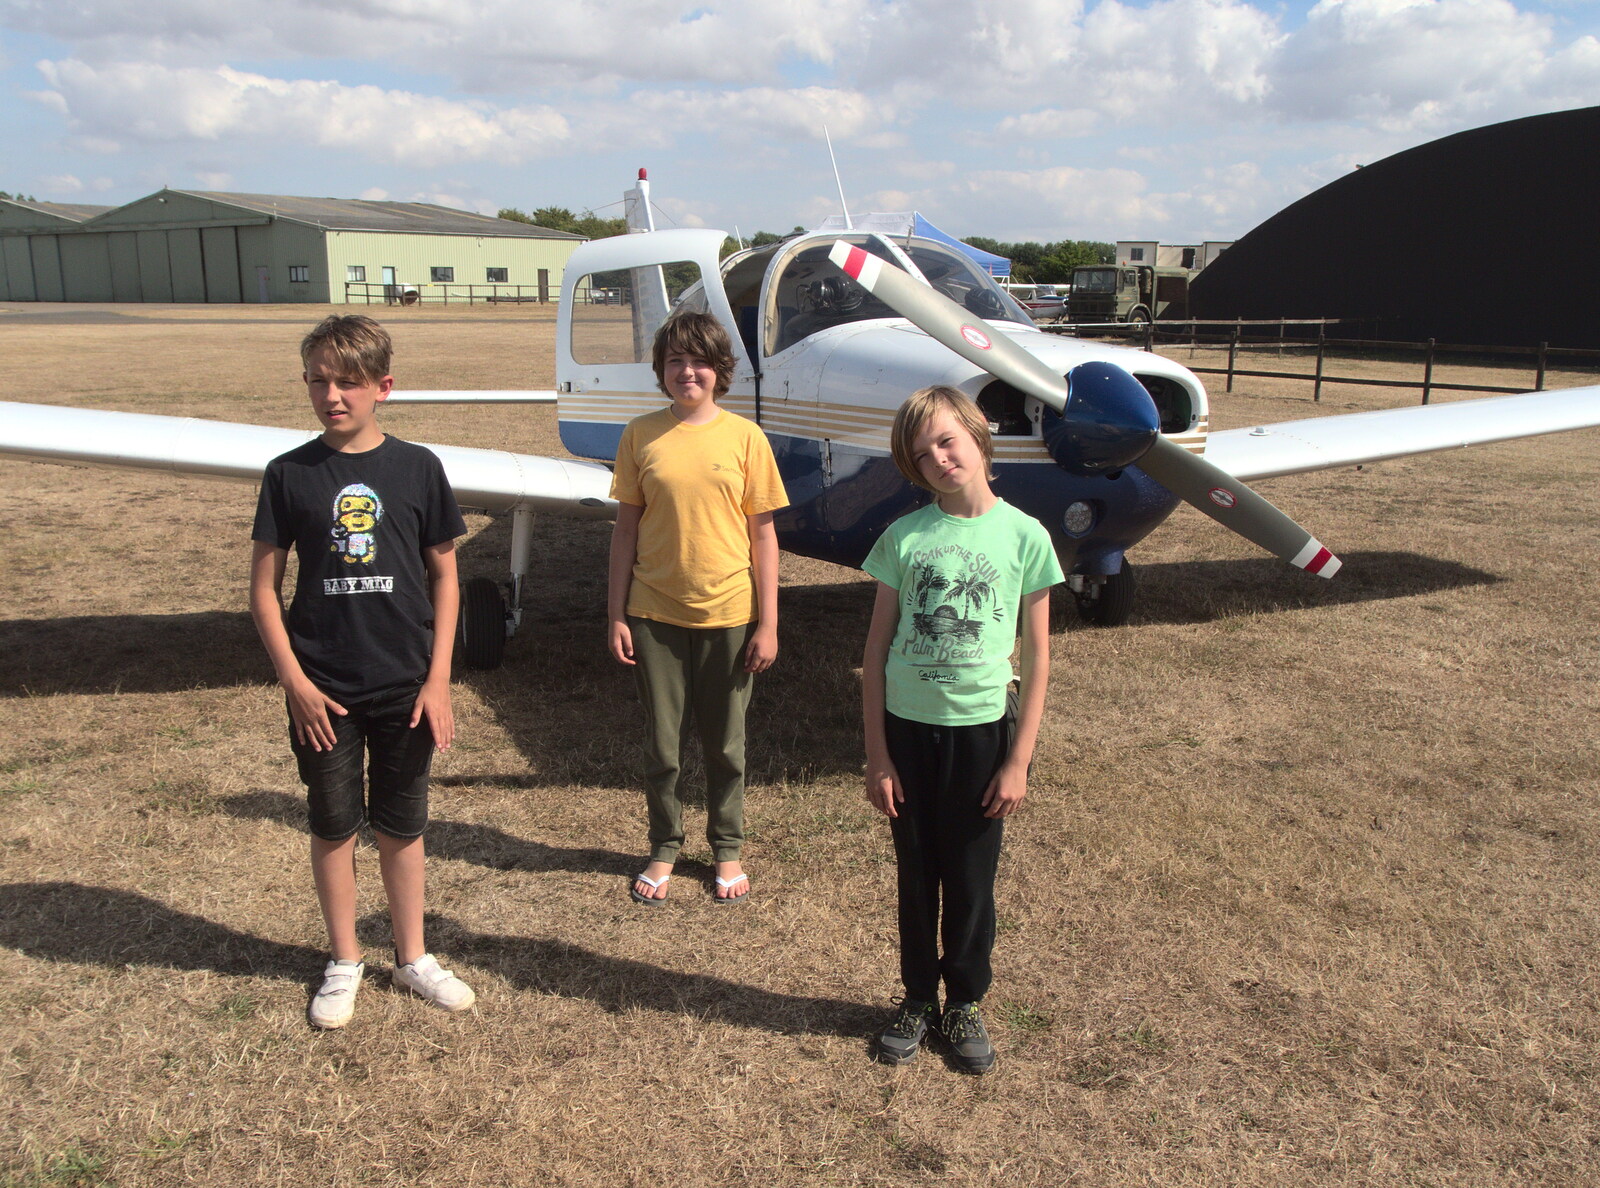 The boys pose for a photo in front of the Piper from A Trip to Old Buckenham Airfield, Norfolk - 6th August 2022